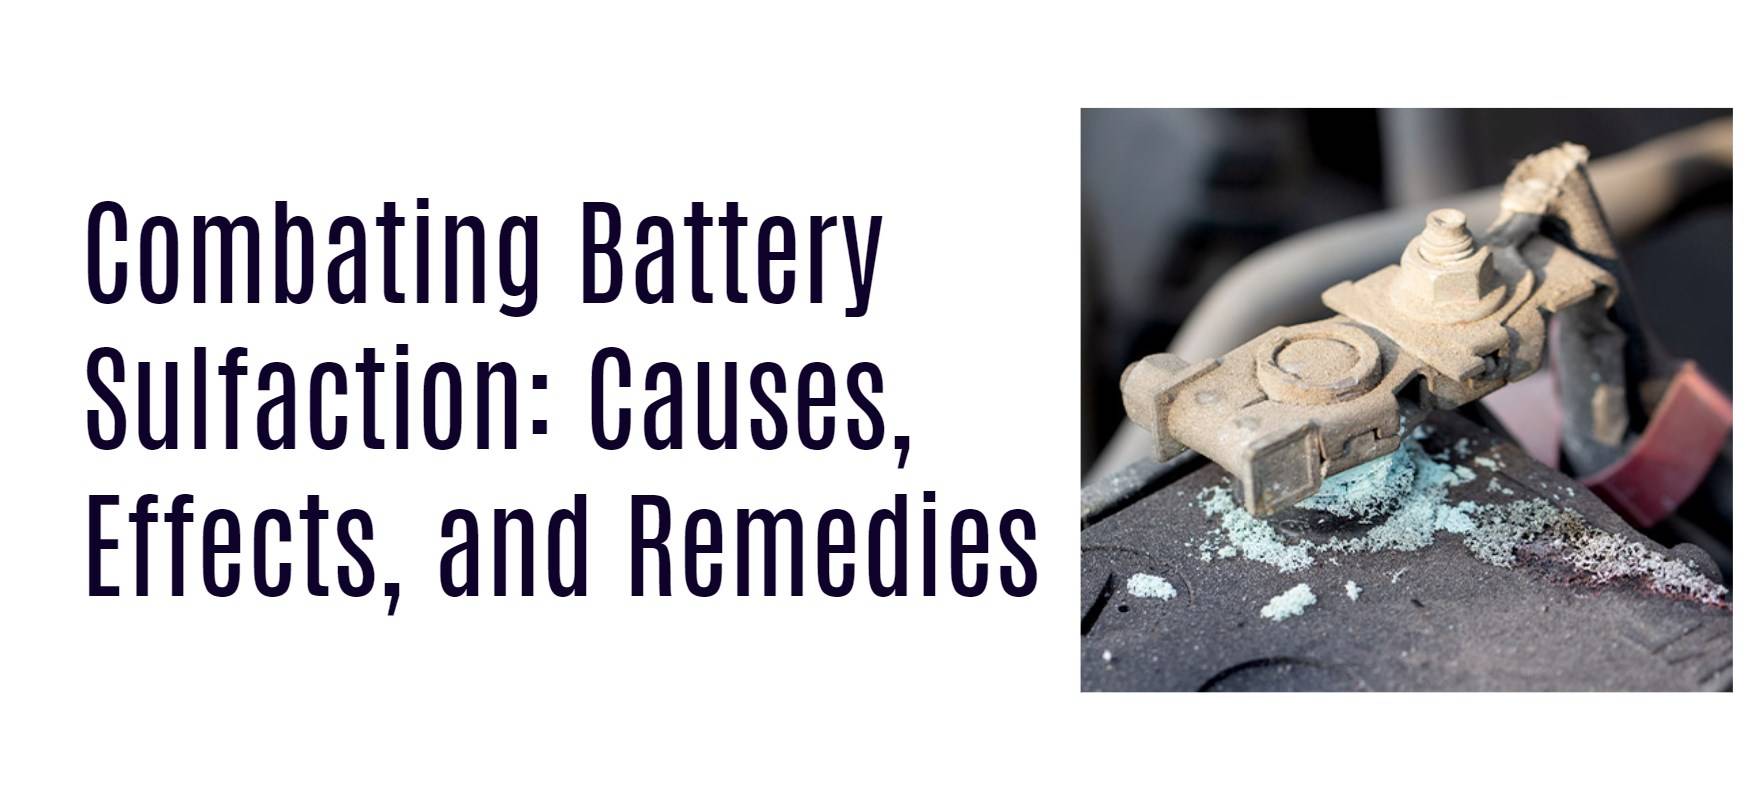 Combating Battery Sulfaction: Causes, Effects, and Remedies